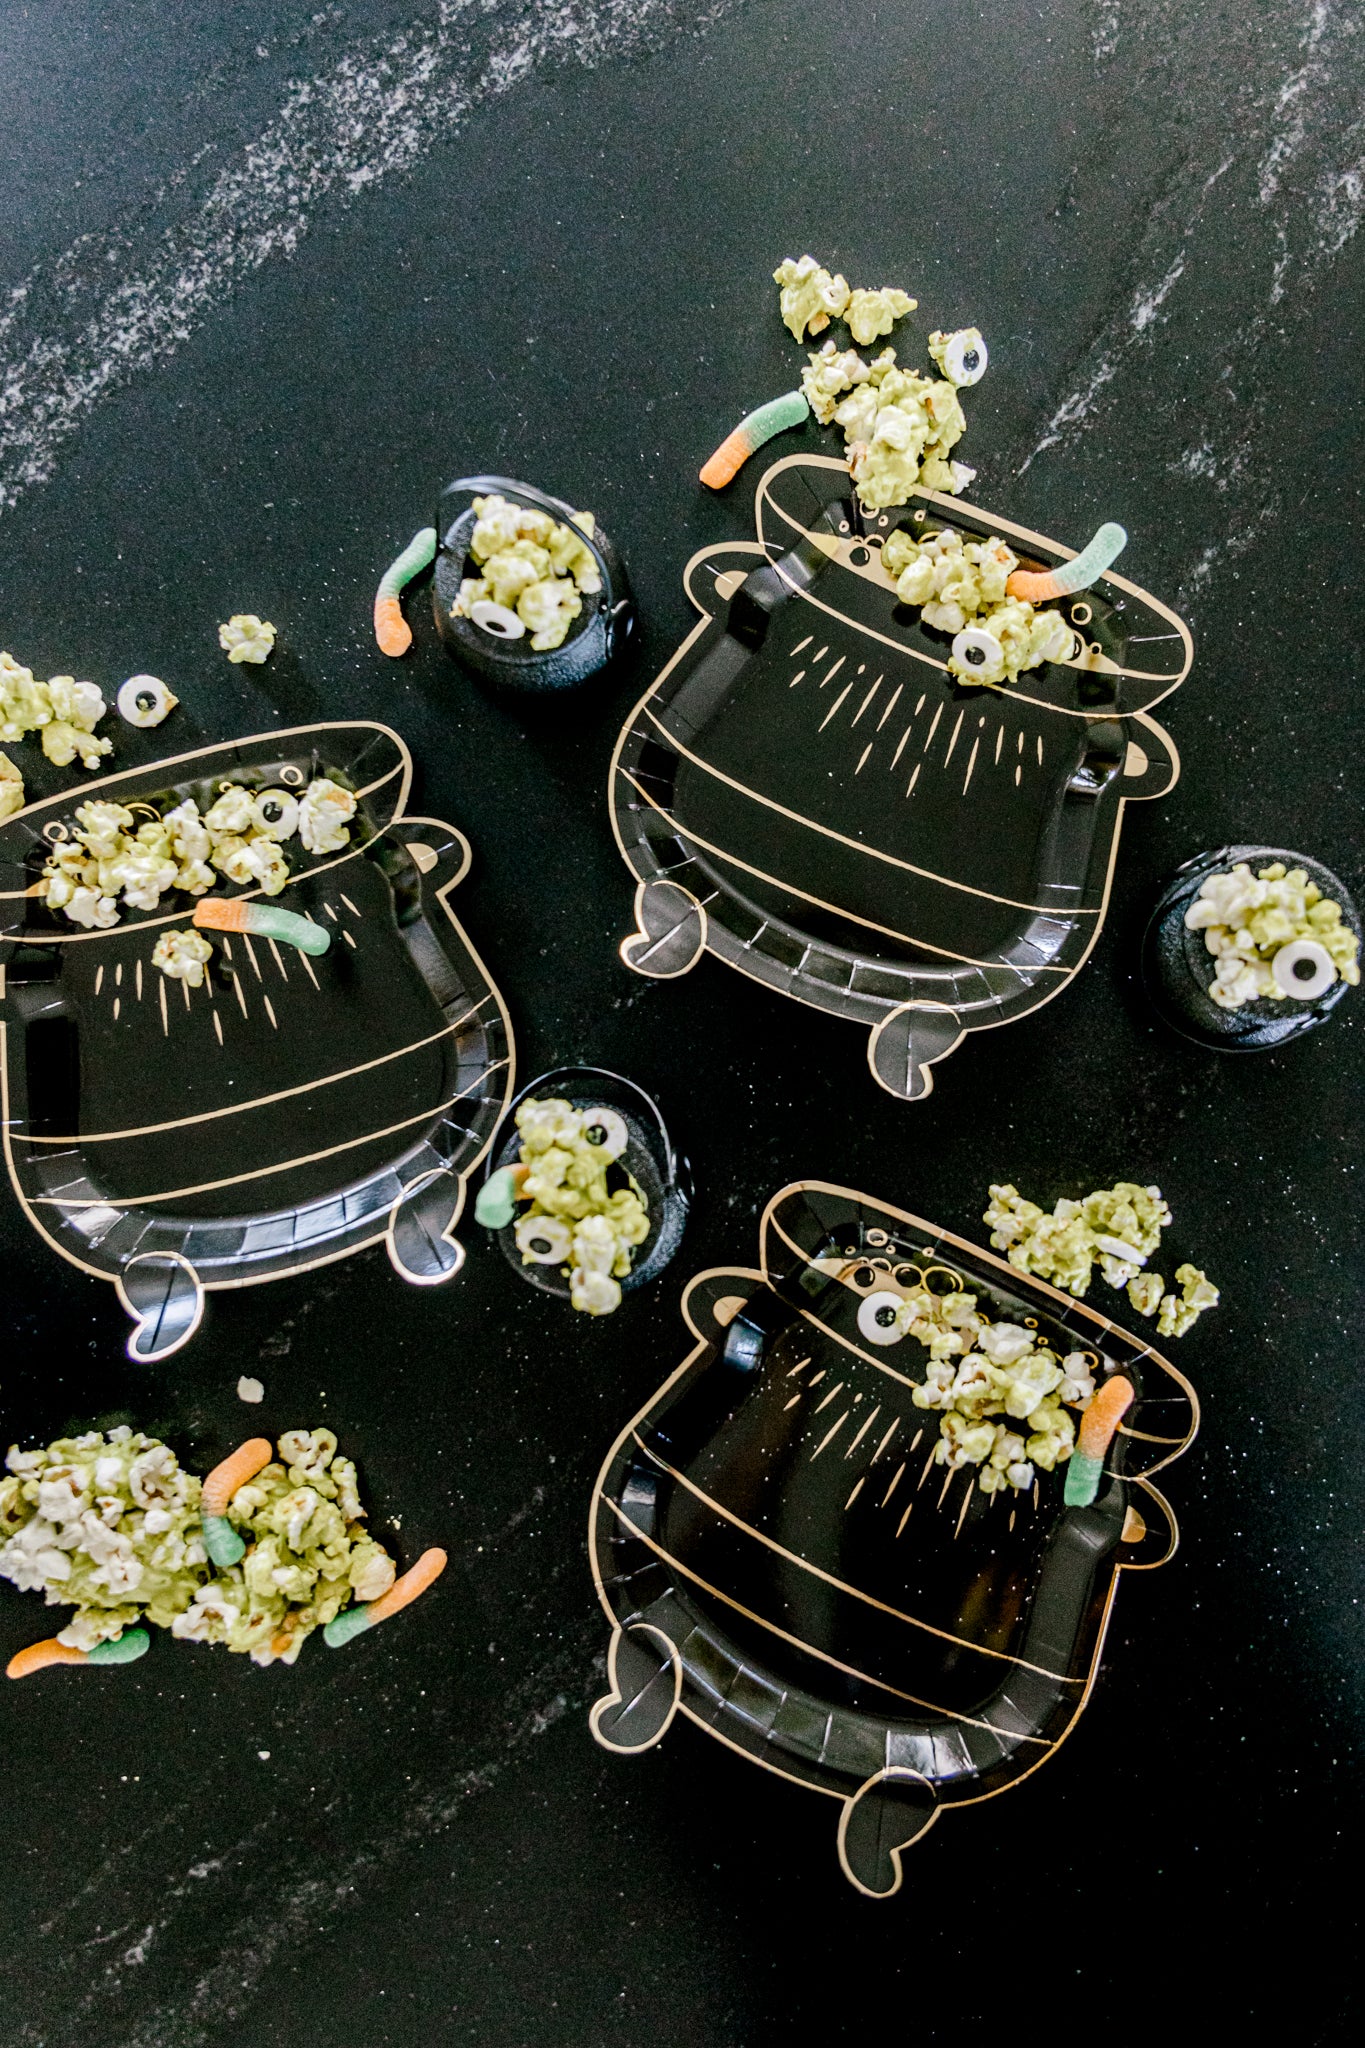 Cauldron plates with candy and popcorn